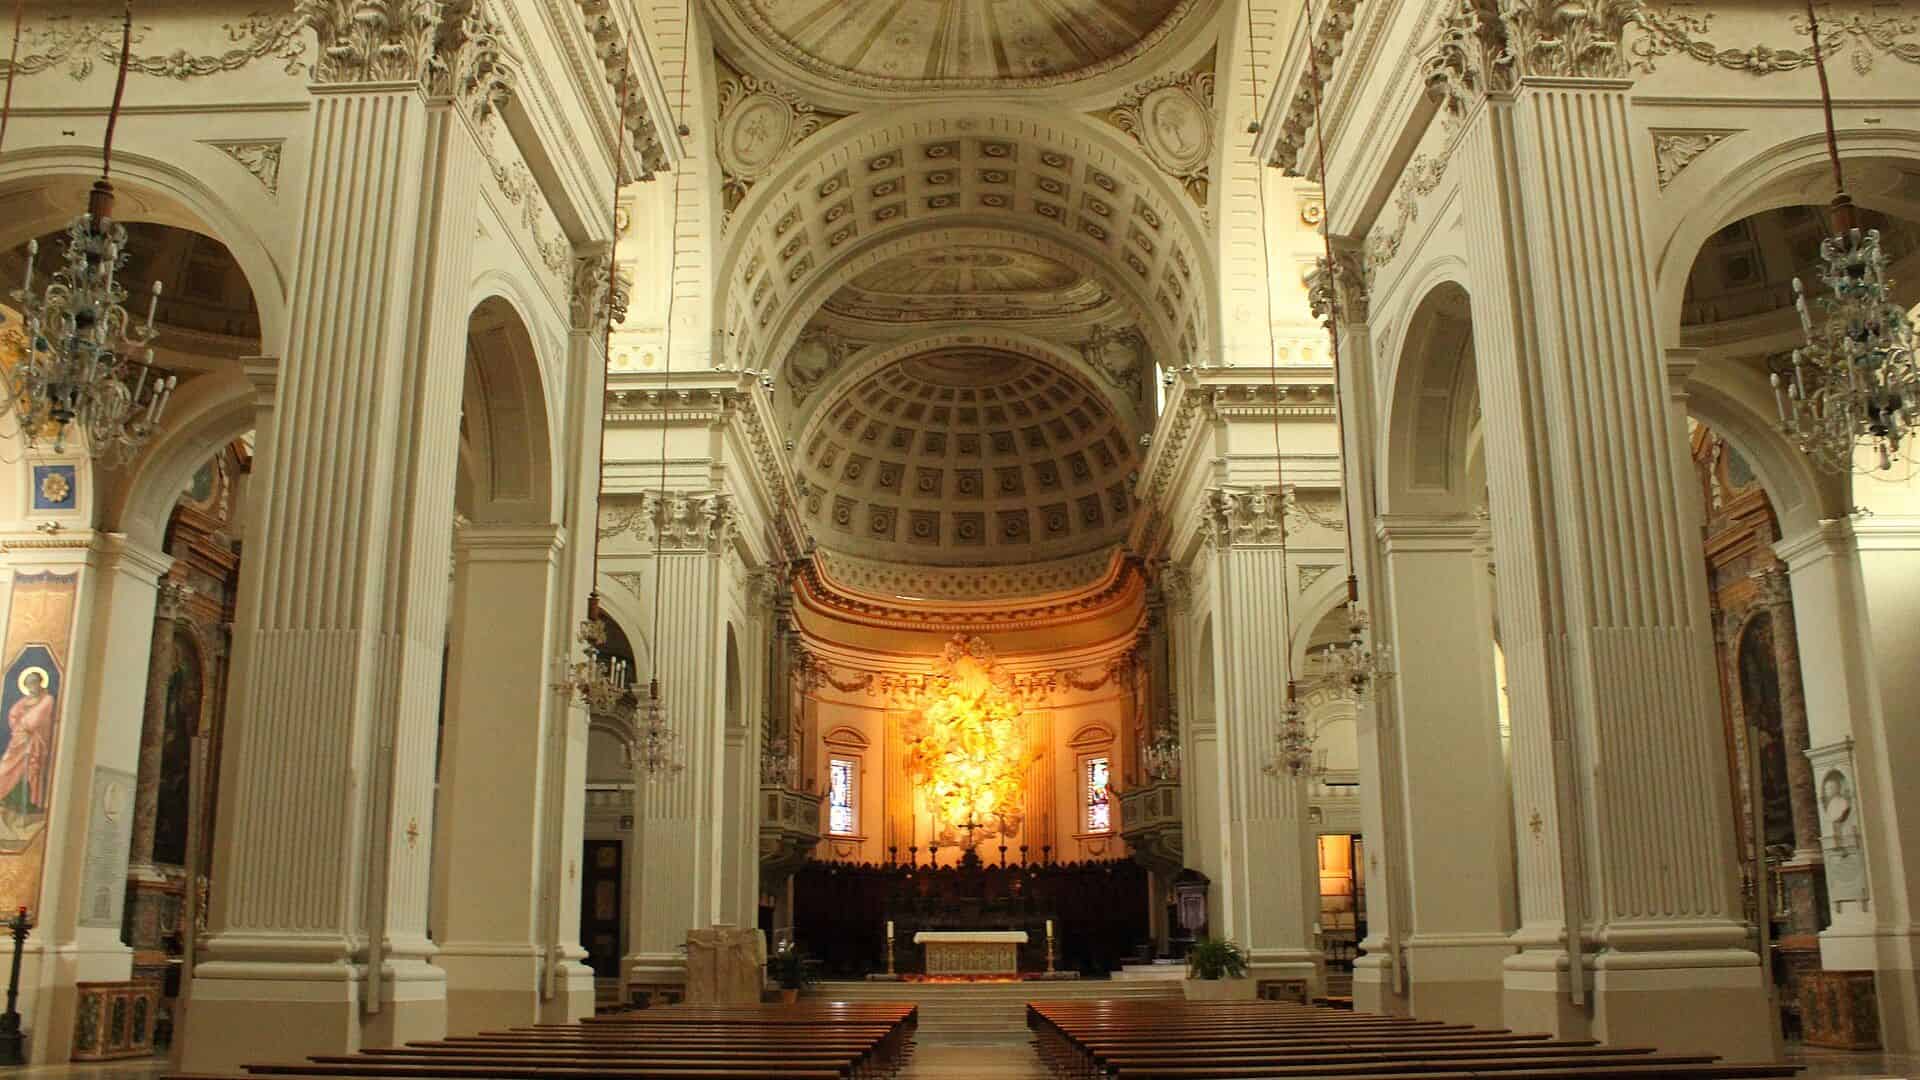 The interior of the duomo of Fermo (image source: paolo vitulli)